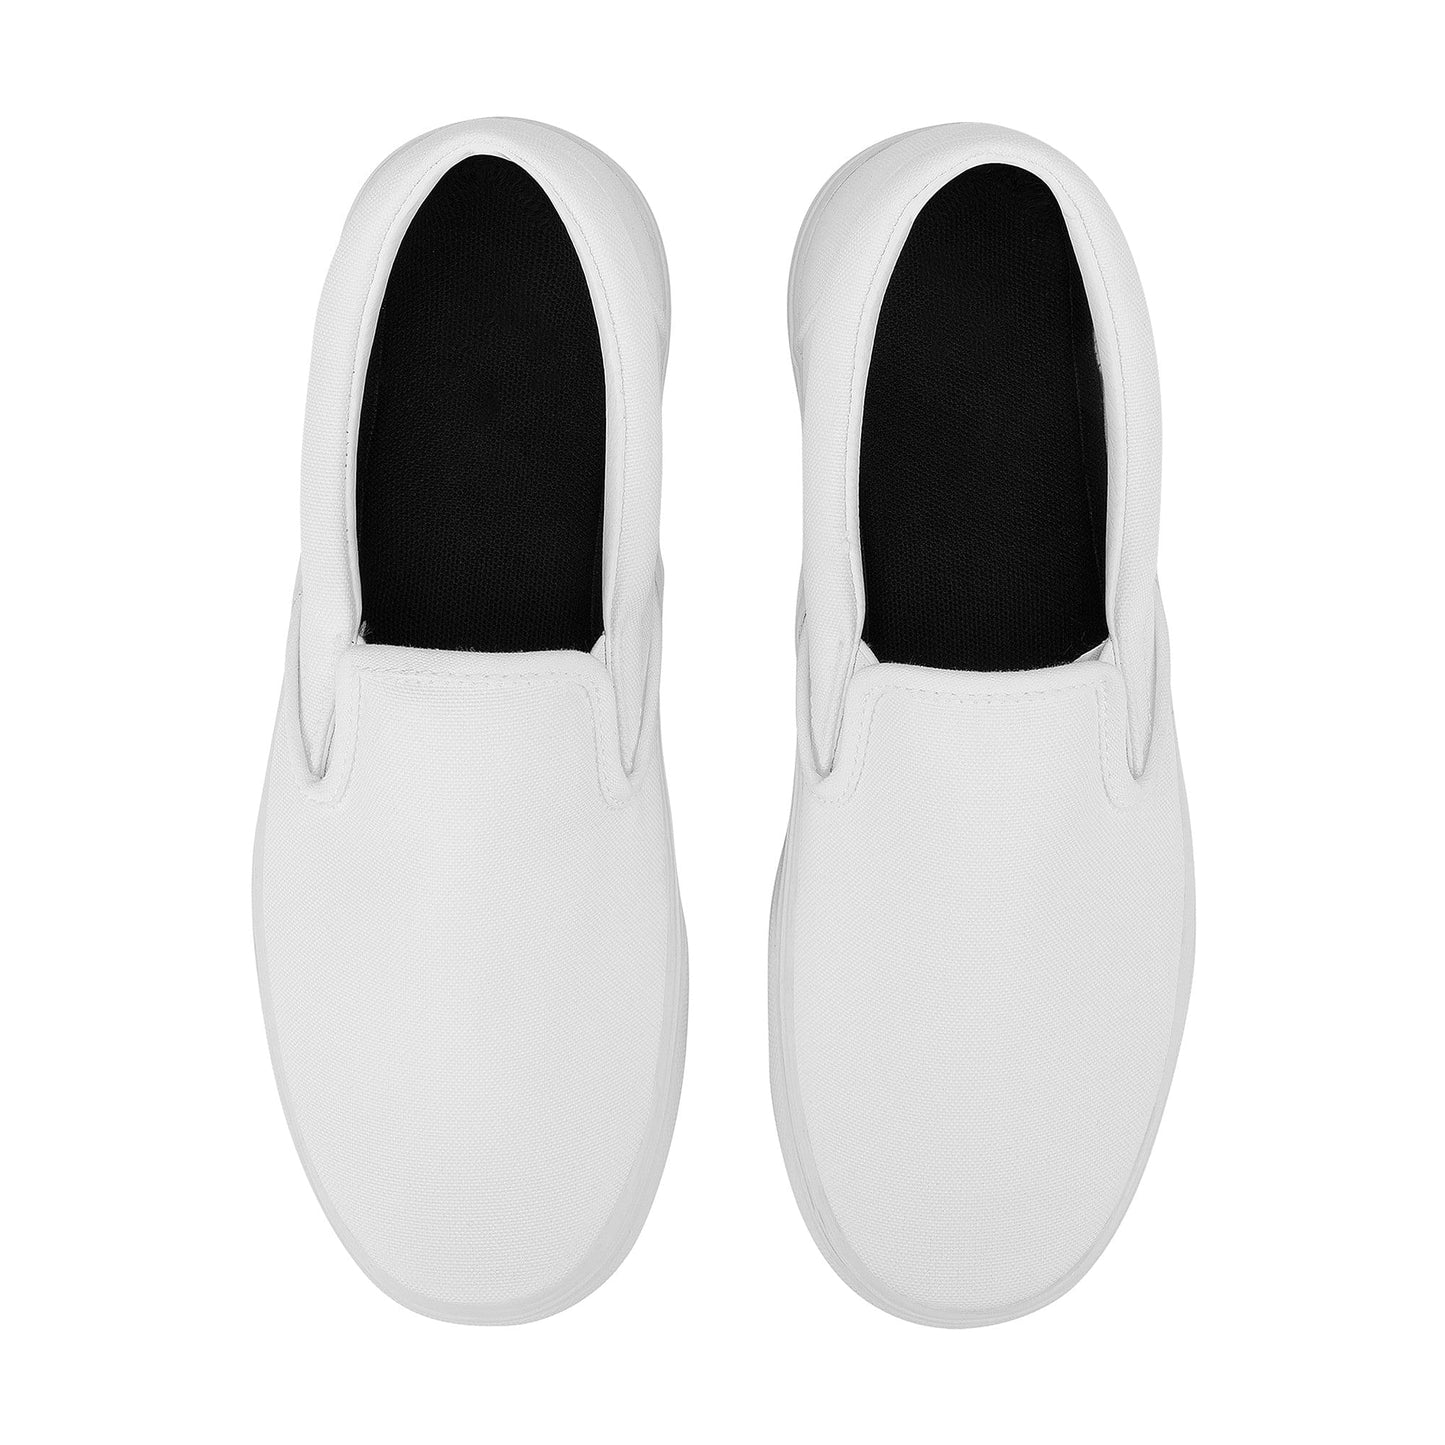 Custom Skate Slip On Shoes -New Style MD Colloid Colors 